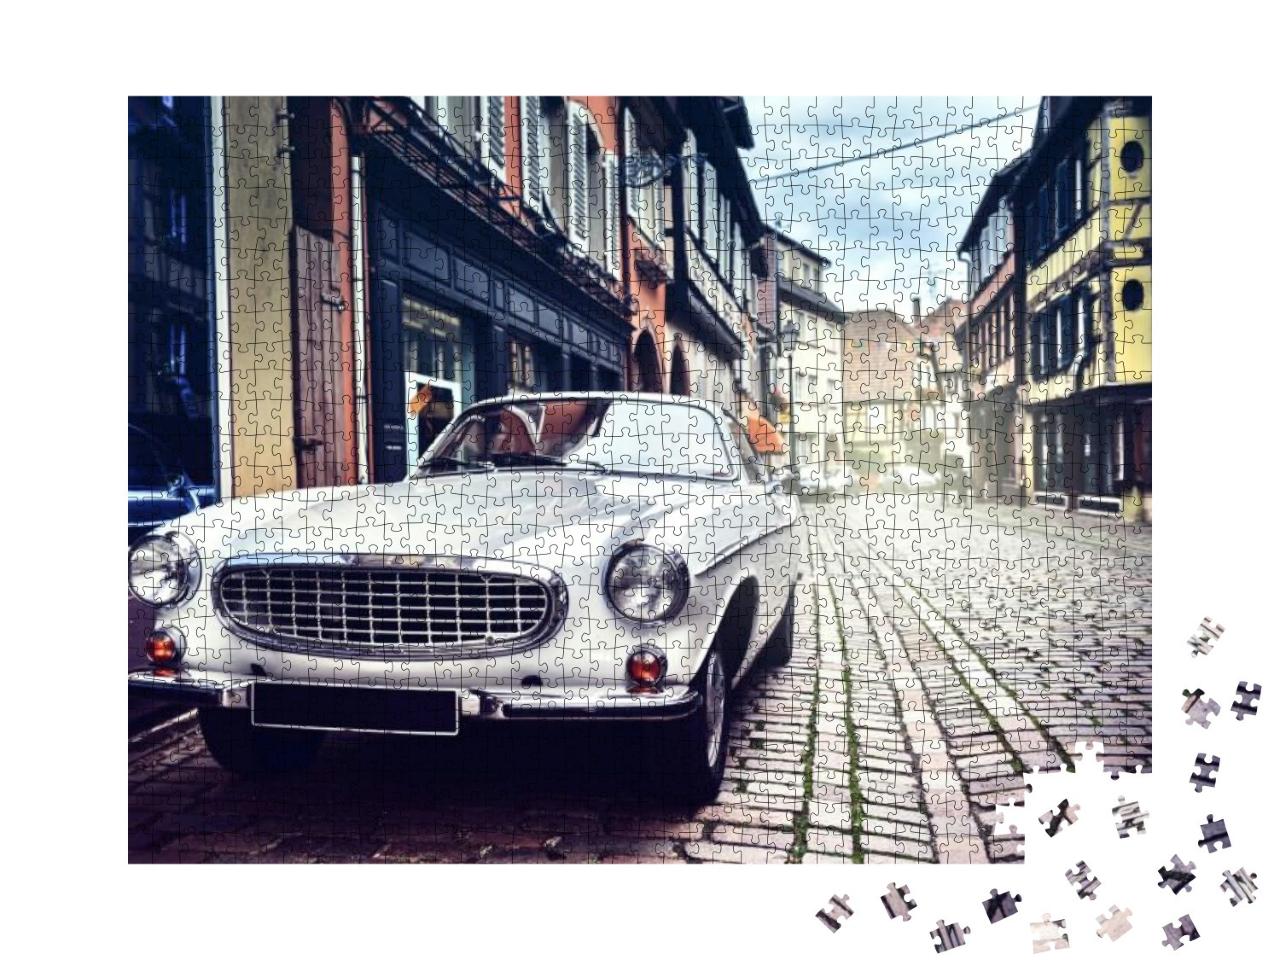 Retro Car Parked in Old European City Street... Jigsaw Puzzle with 1000 pieces